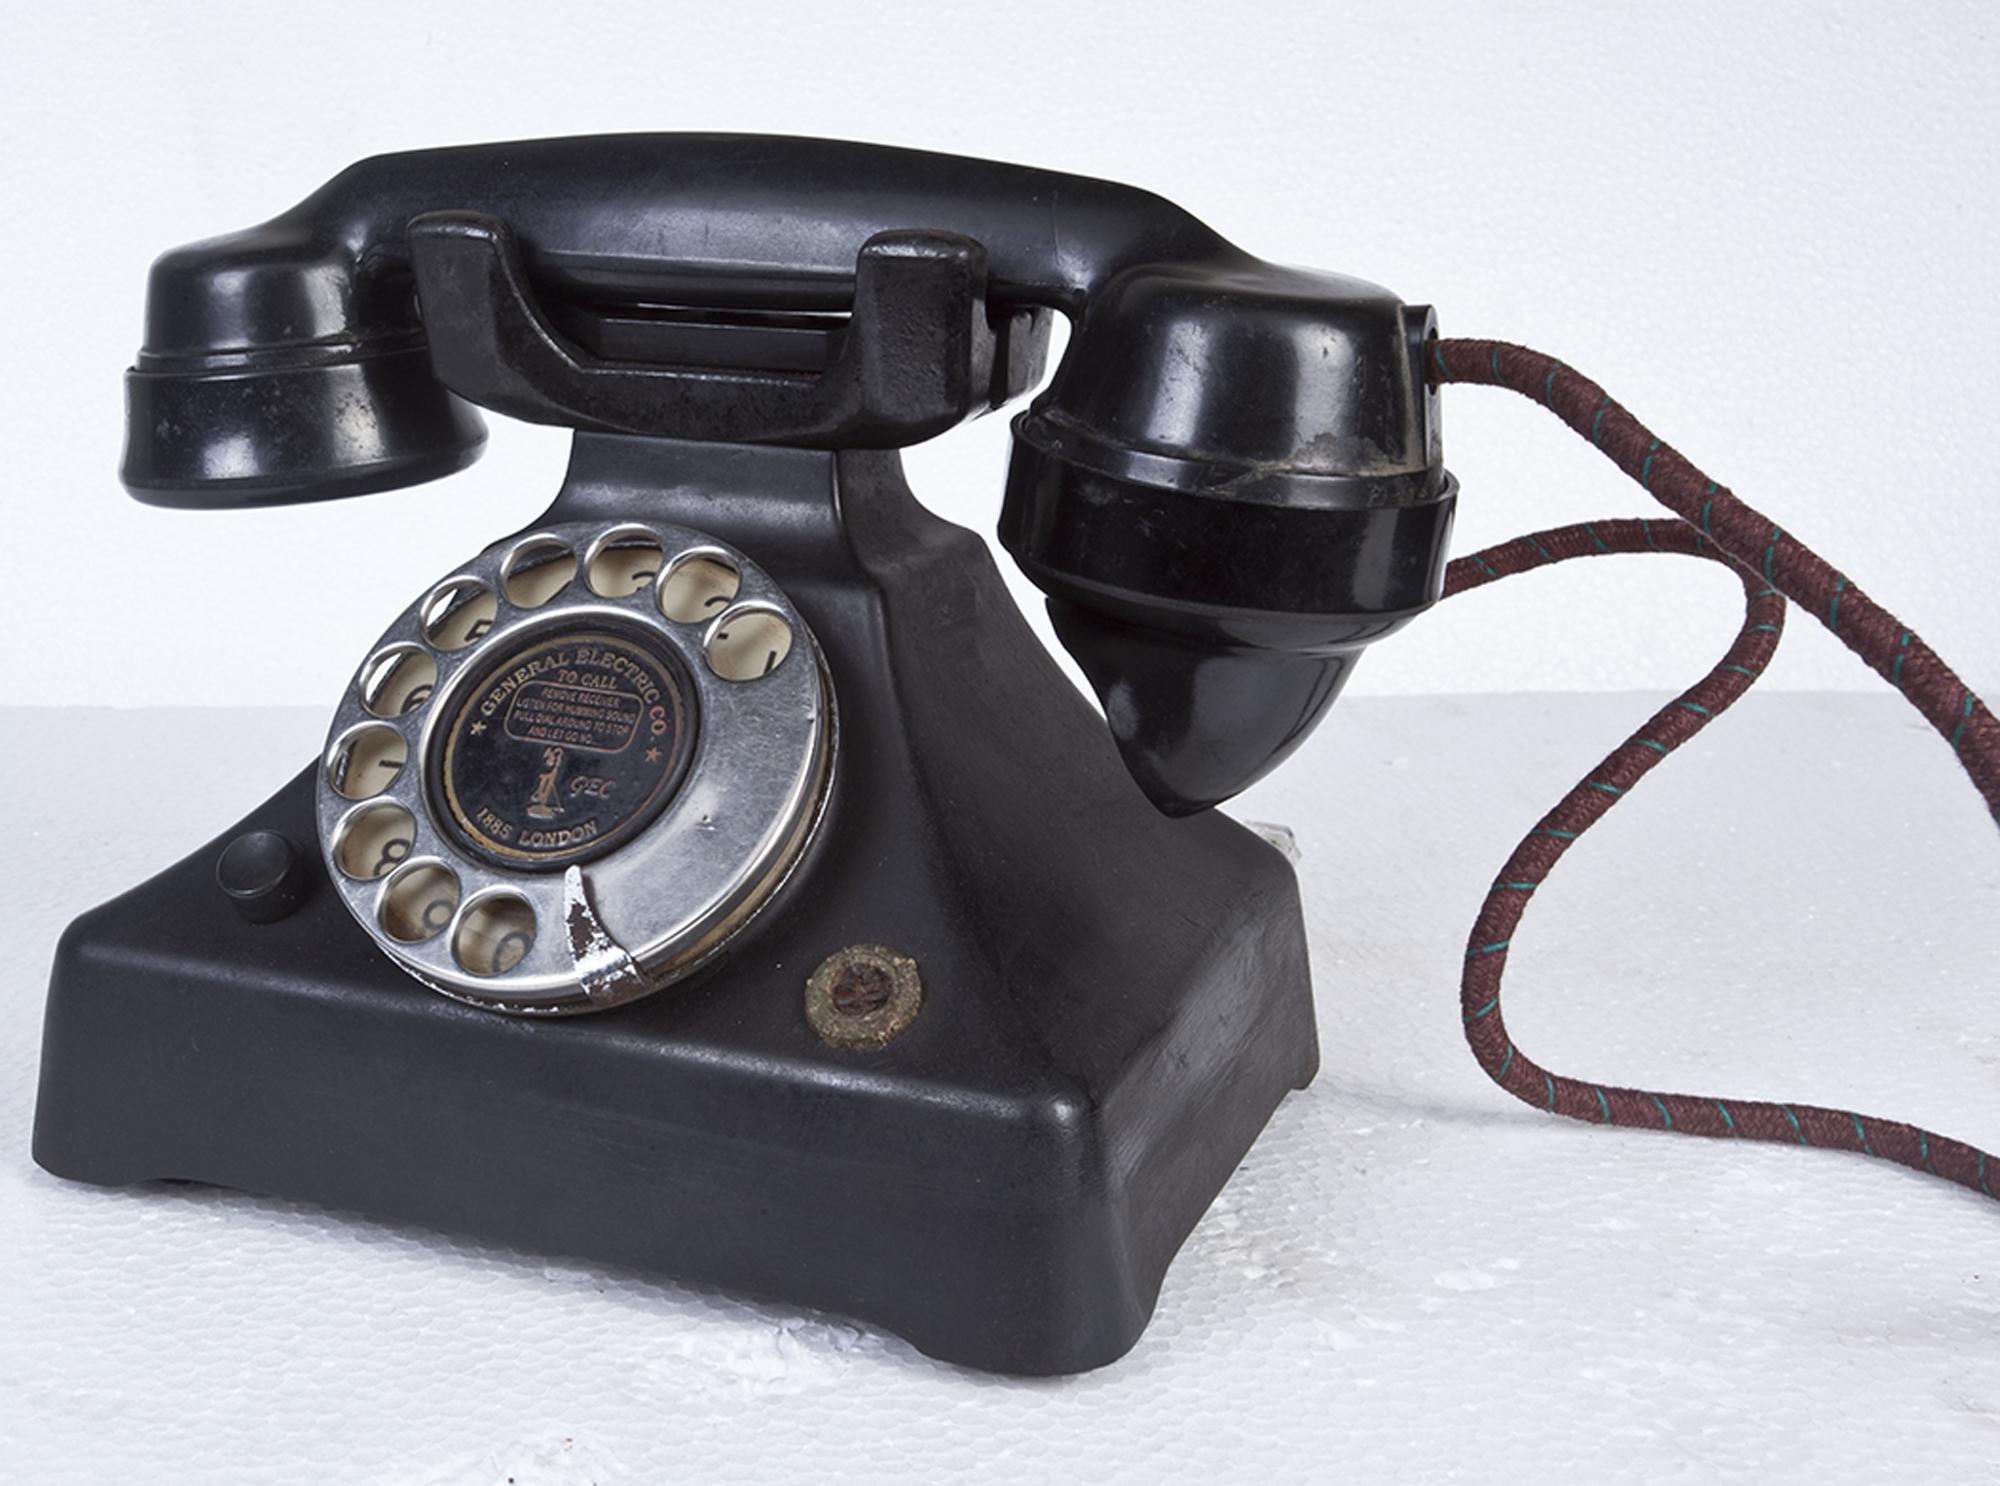 An Art Deco Bakelite telephone by General Electric, London. Chrome rotary dial and refurbished cord. In working order complete with pulse to tone converter. So that you can actually use it.